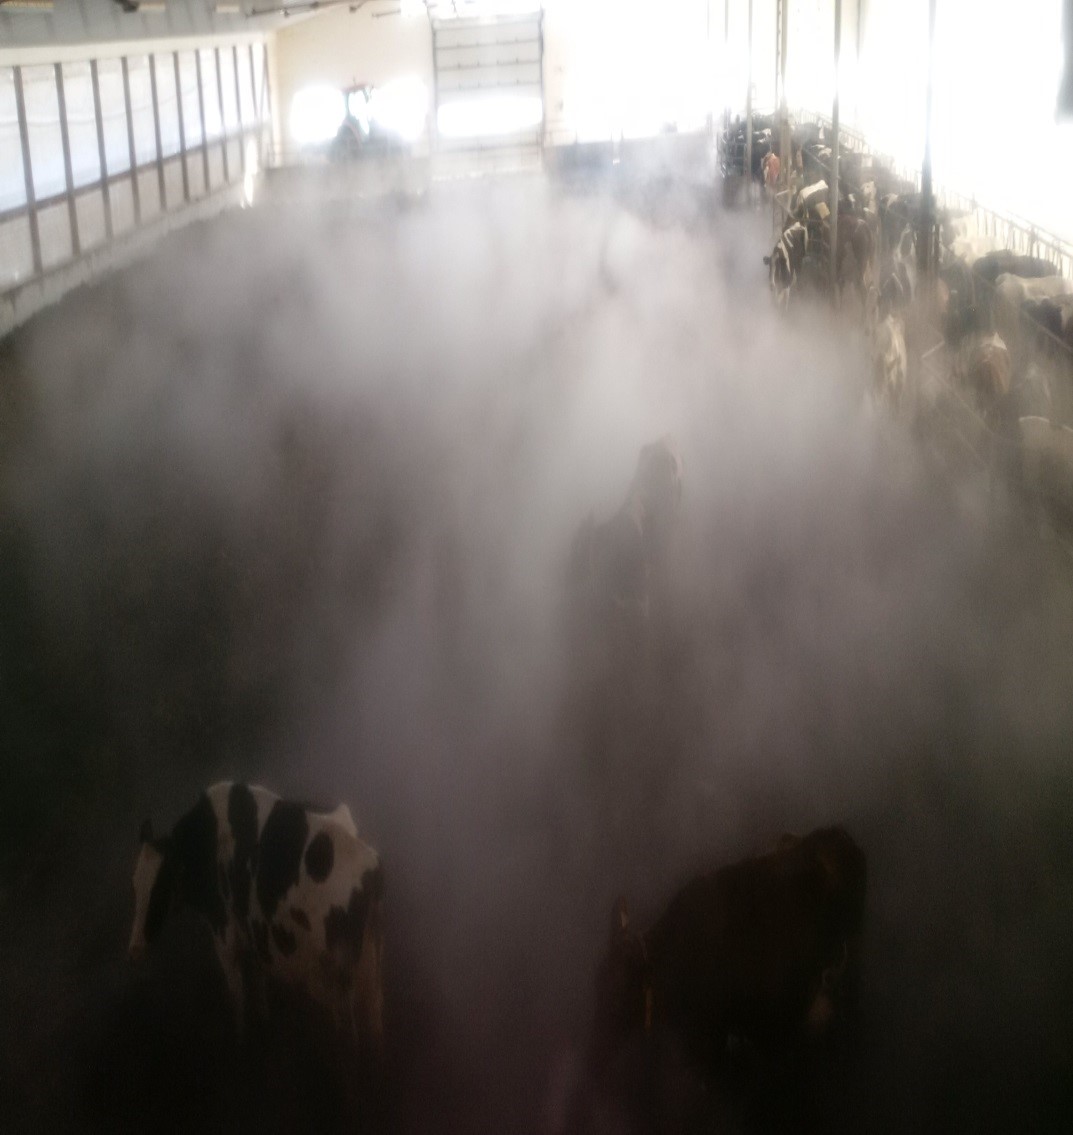 Fogging is a challenge in Compost-bedded pack barns during winter